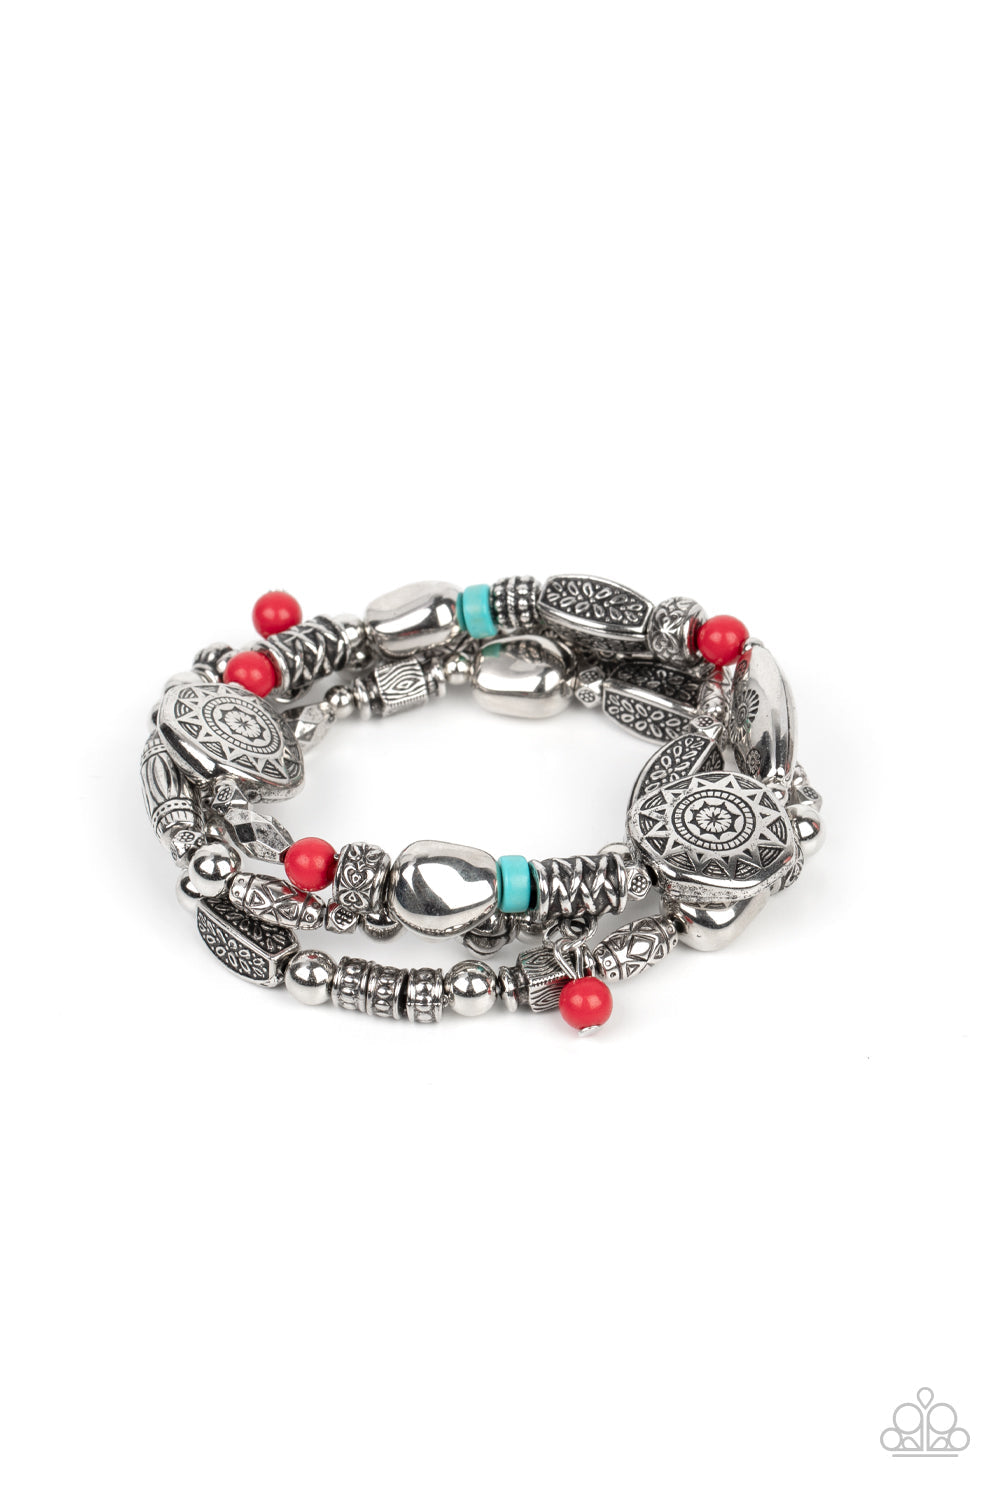 Western Quest - Red Turquoise and Silver Bracelet - Paparazzi Accessories - Hints of red and turquoise accents, a mismatched collection of silver beads, textured silver accents, and floral and sunburst embossed beads are threaded along stretchy bands around the wrist.